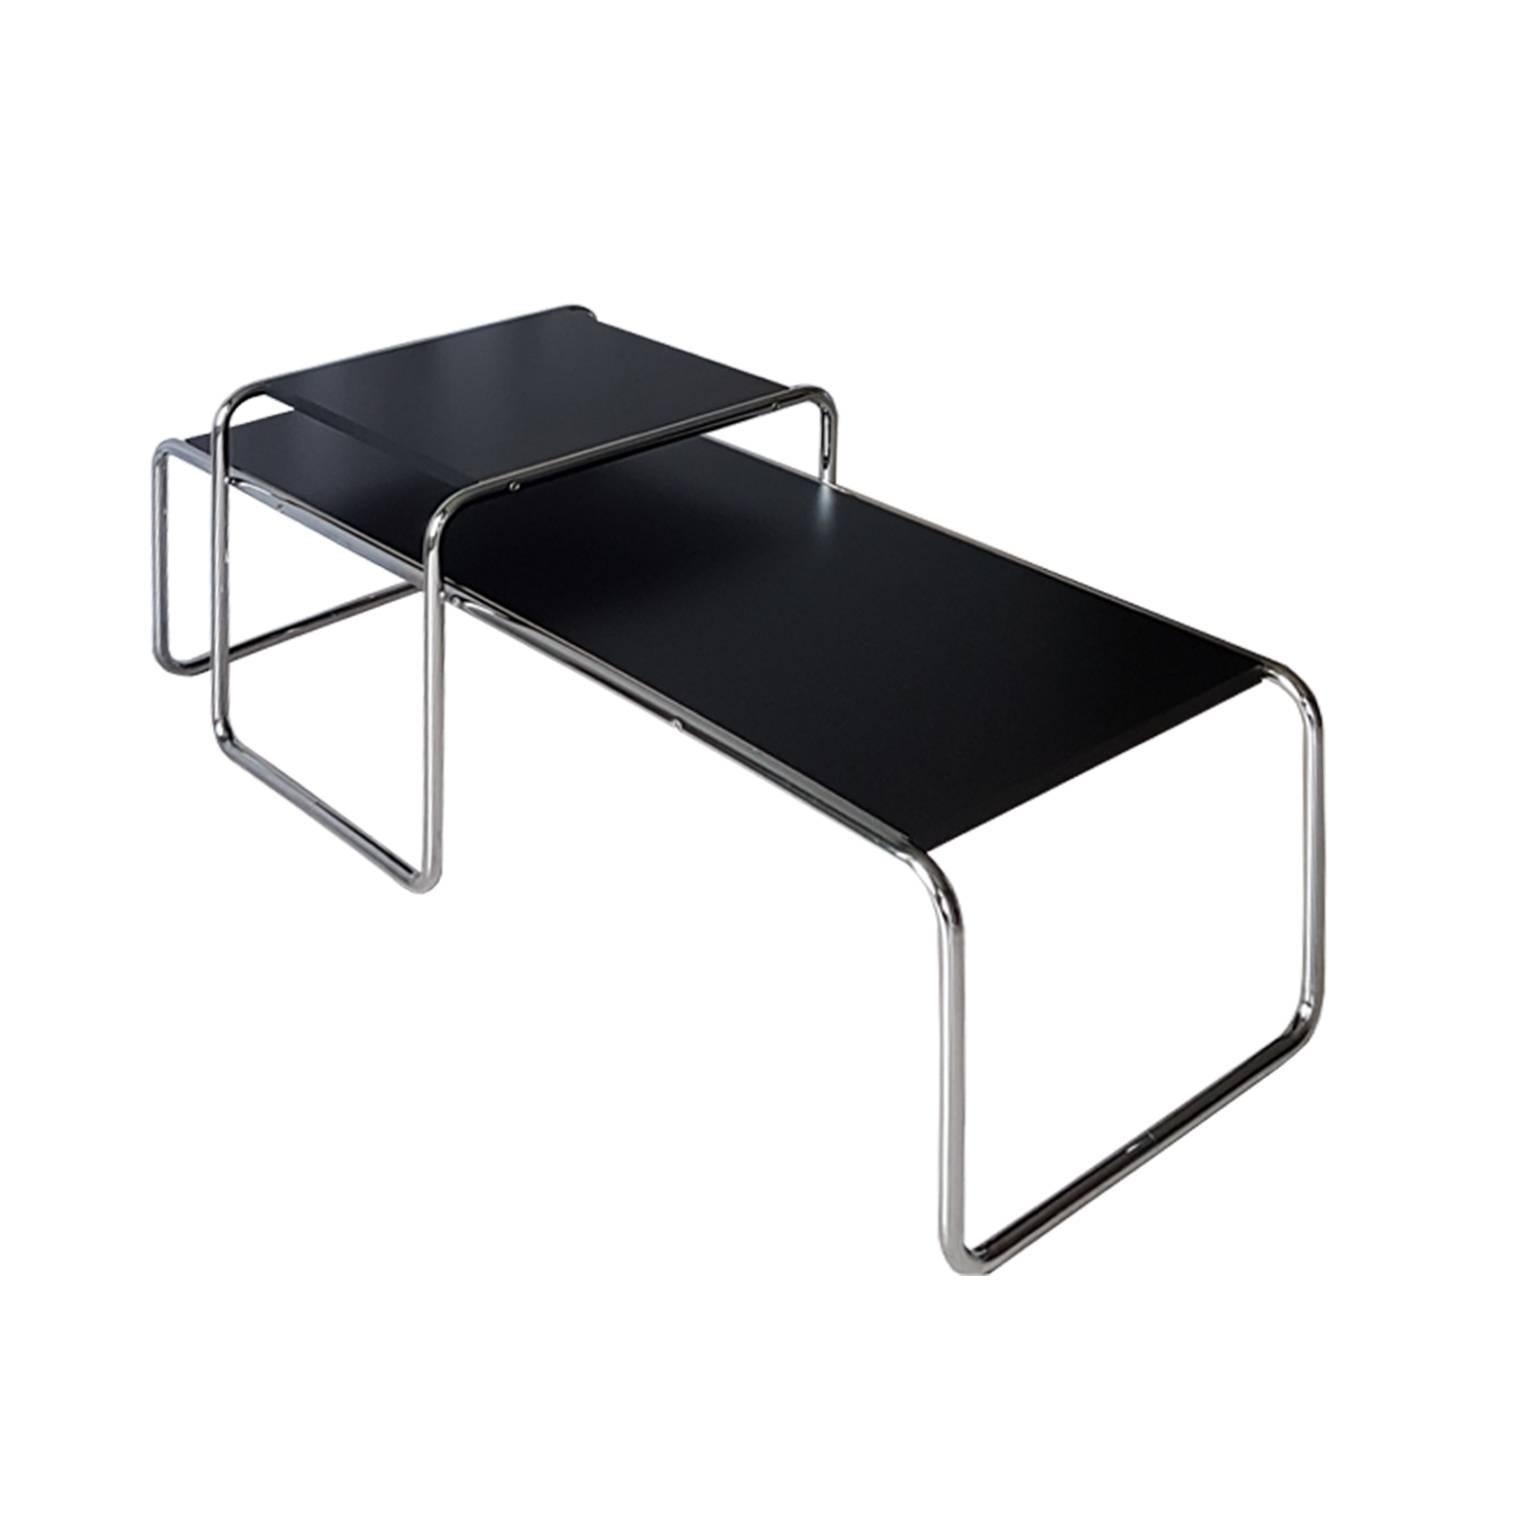 Set of coffee table in chrome-plated tubular steel with black plastic laminate top.
Design Drawing 1925 by Marcel Breurer.
The item comes from Alivar Museum Collection.
The concept of this Collection was developed from 1984 and it was based on a